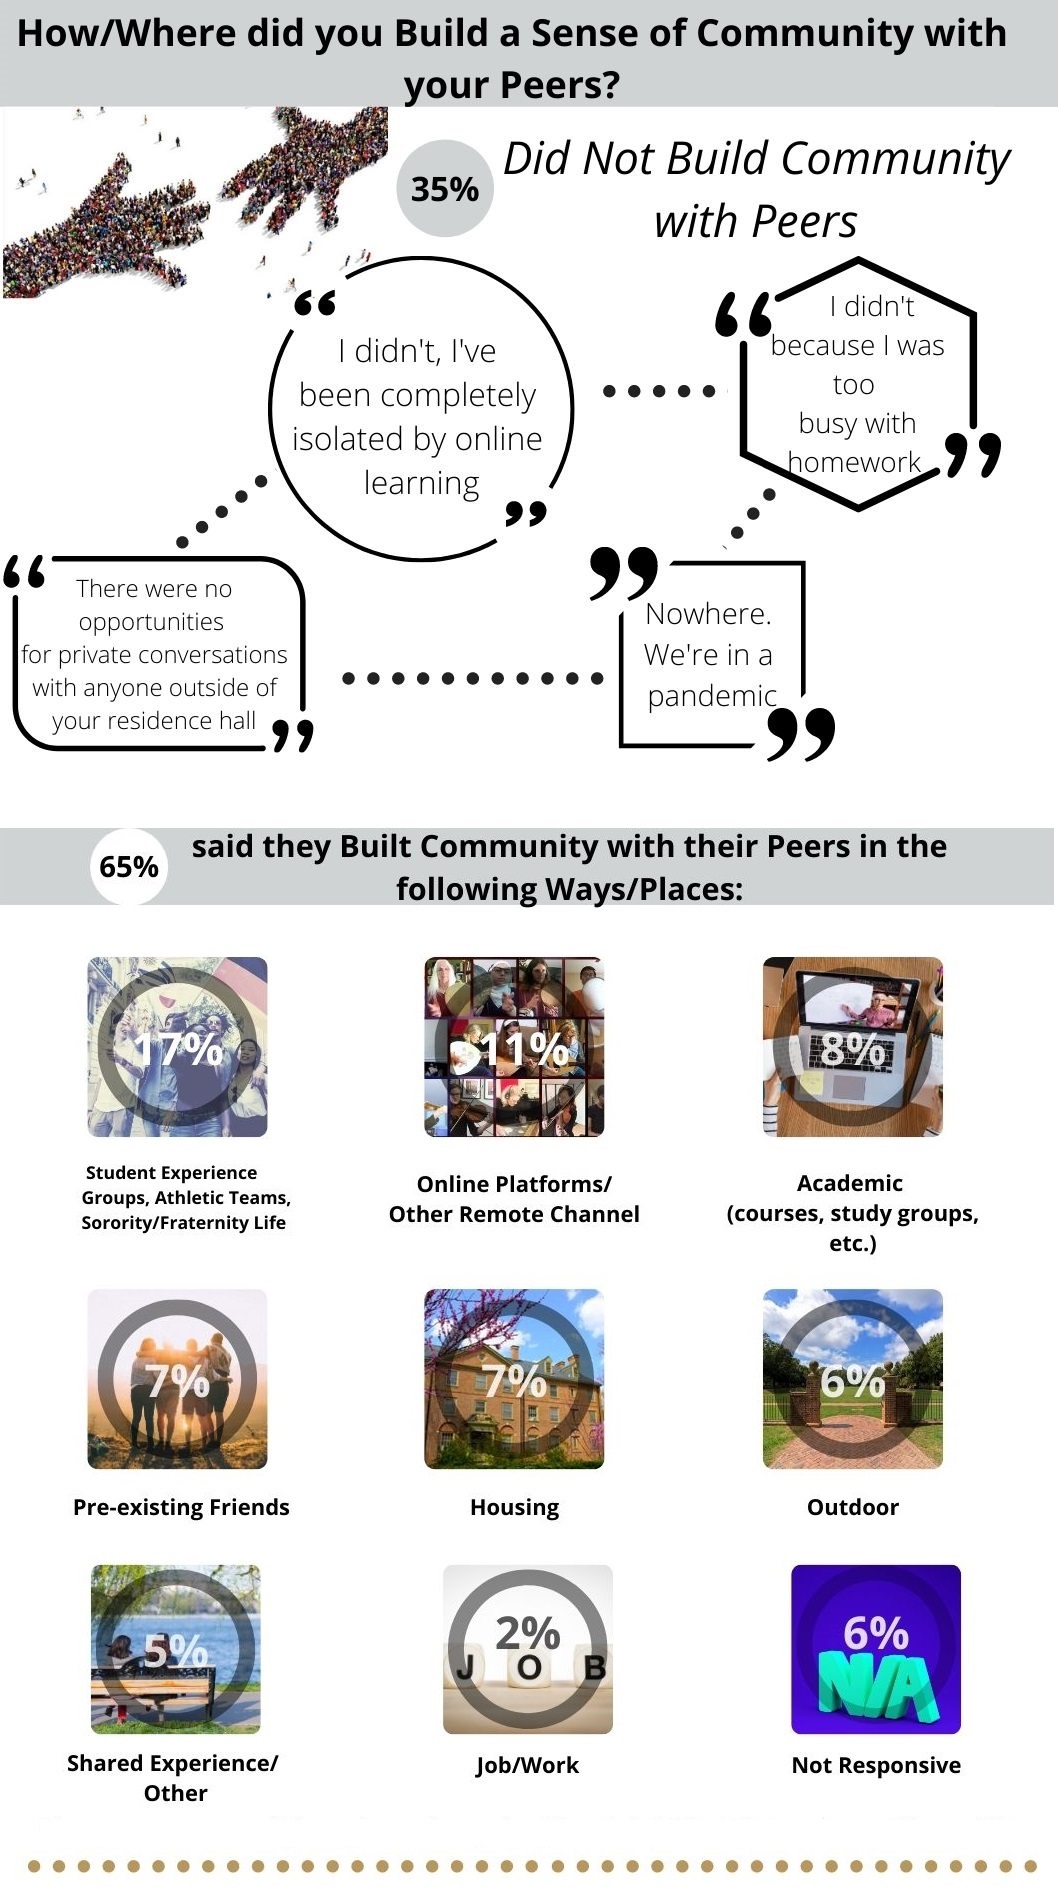 How or Where Did You Build Community with Peers? 35% Did not, 17% Student Groups, Teams, Greek Life, 11% Online or Remote, 8% Academic groups, 7% pre-existing friends, 7% housing, 6% outdoors, 5% Shared experience or other, 2% job, 6% not responsive 